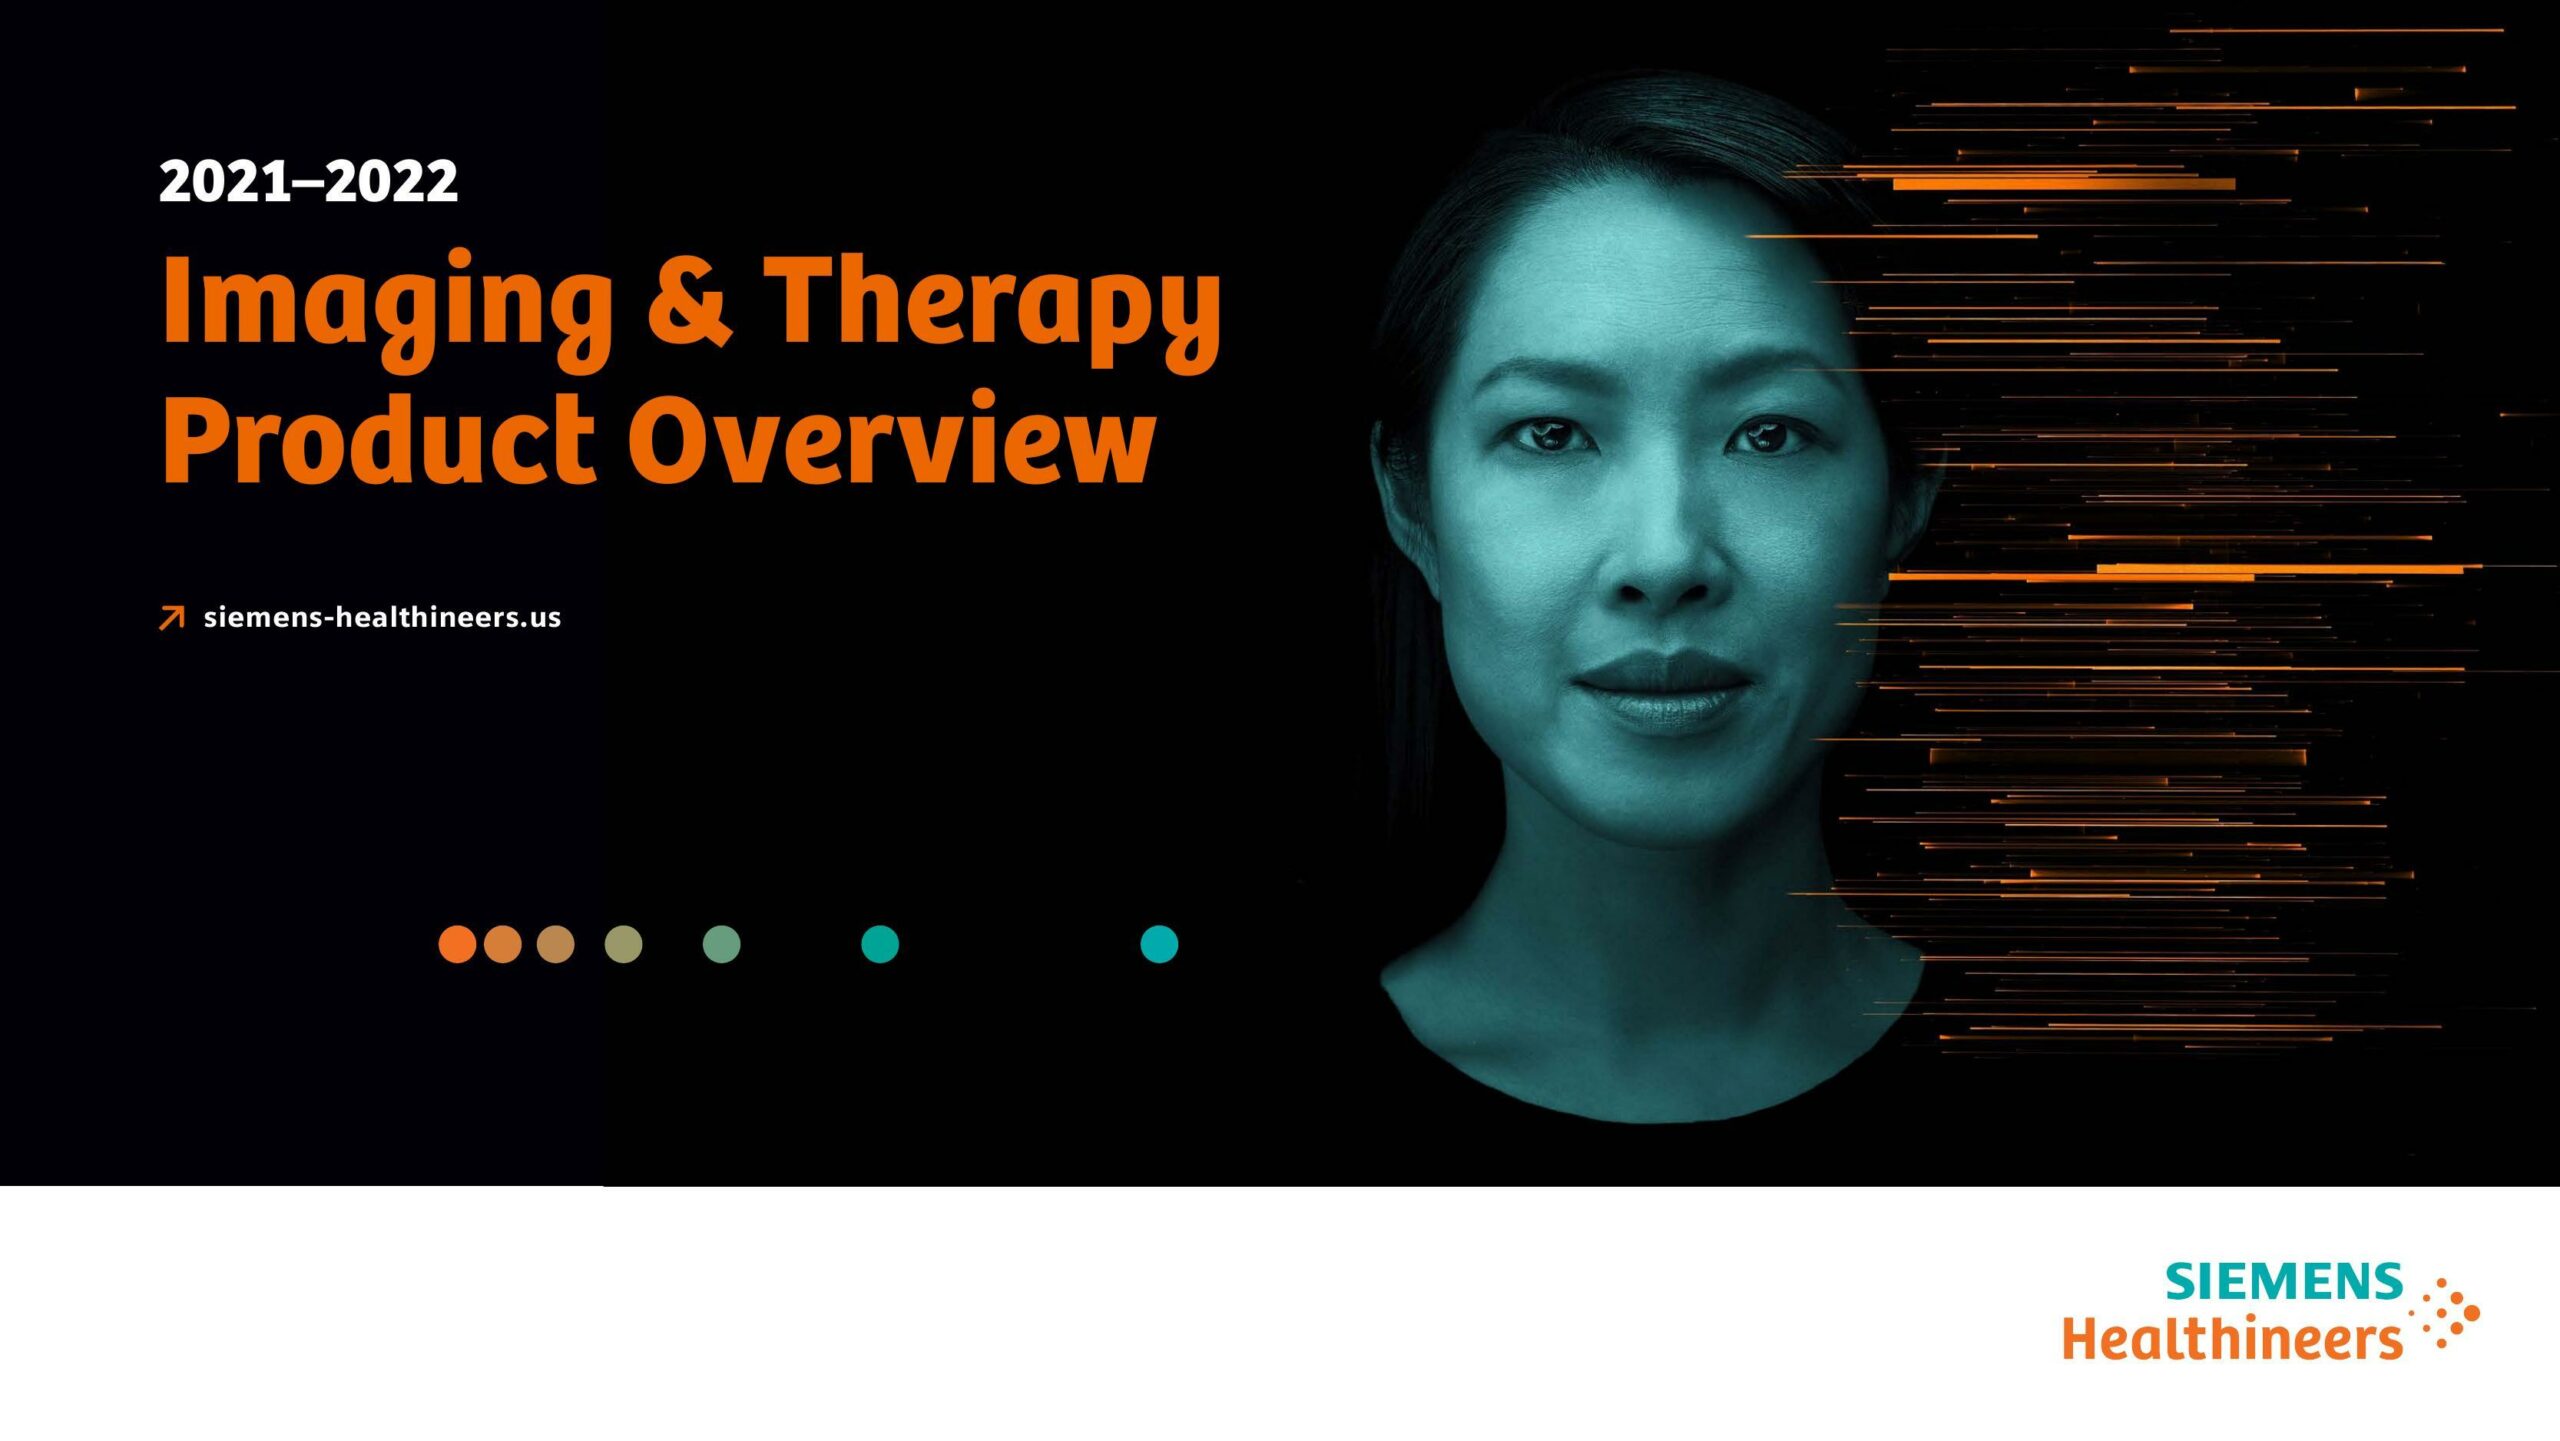 imaging-therapy-product-overview.pdf